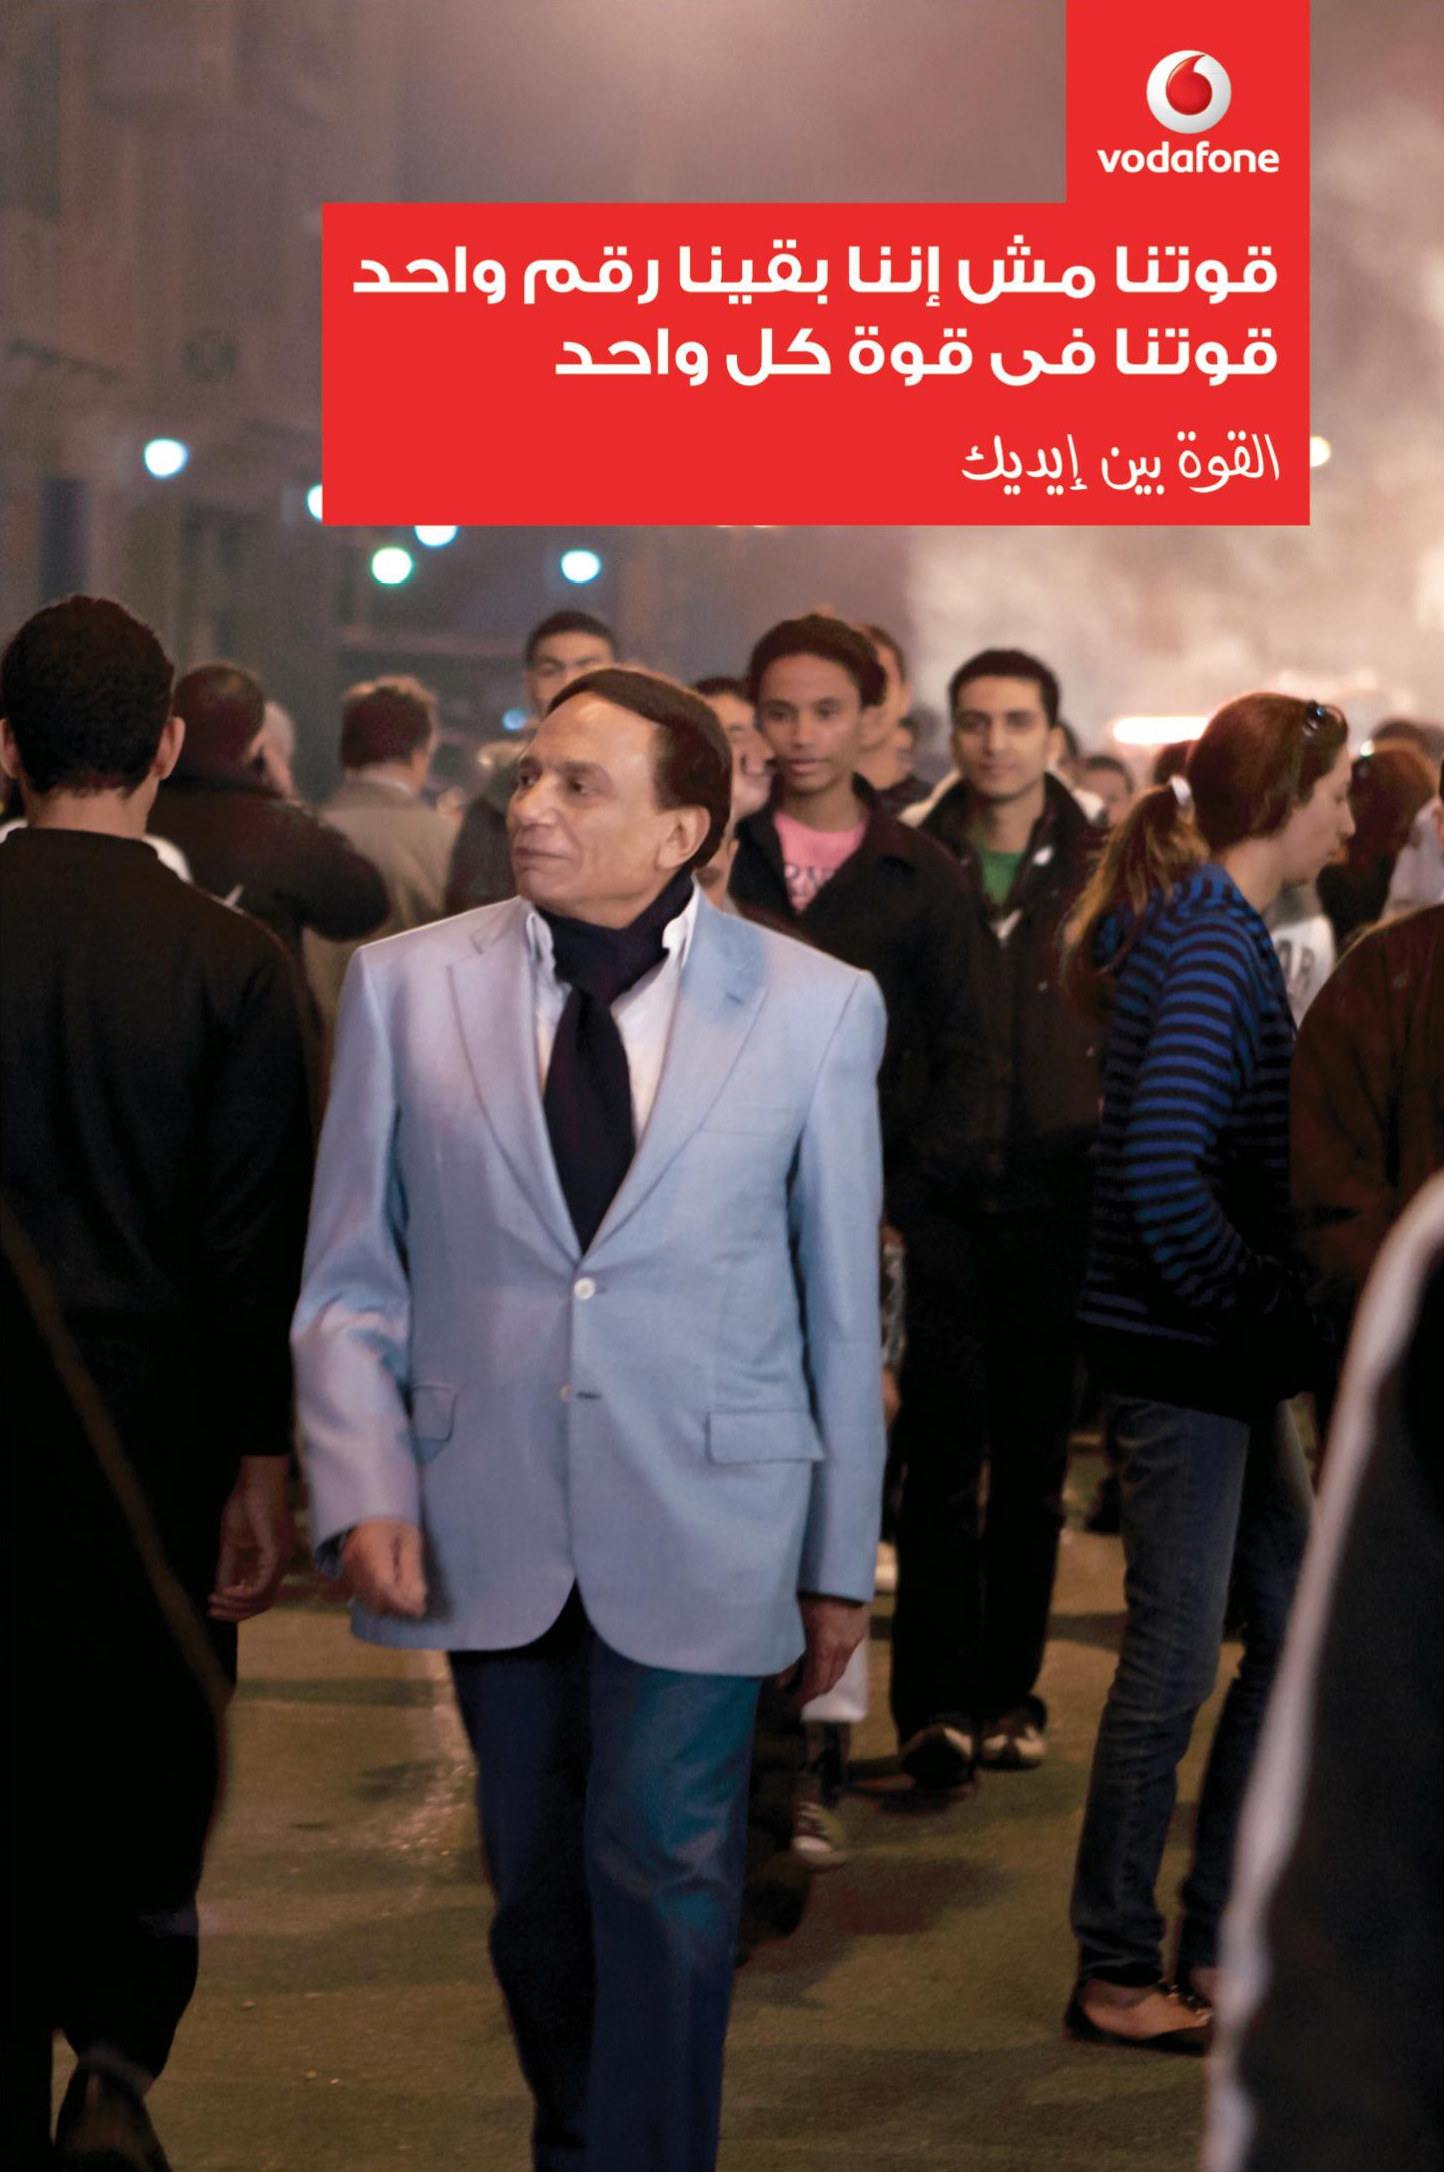 The Vodafone ad 'Power of Egyptians' (December 2009)